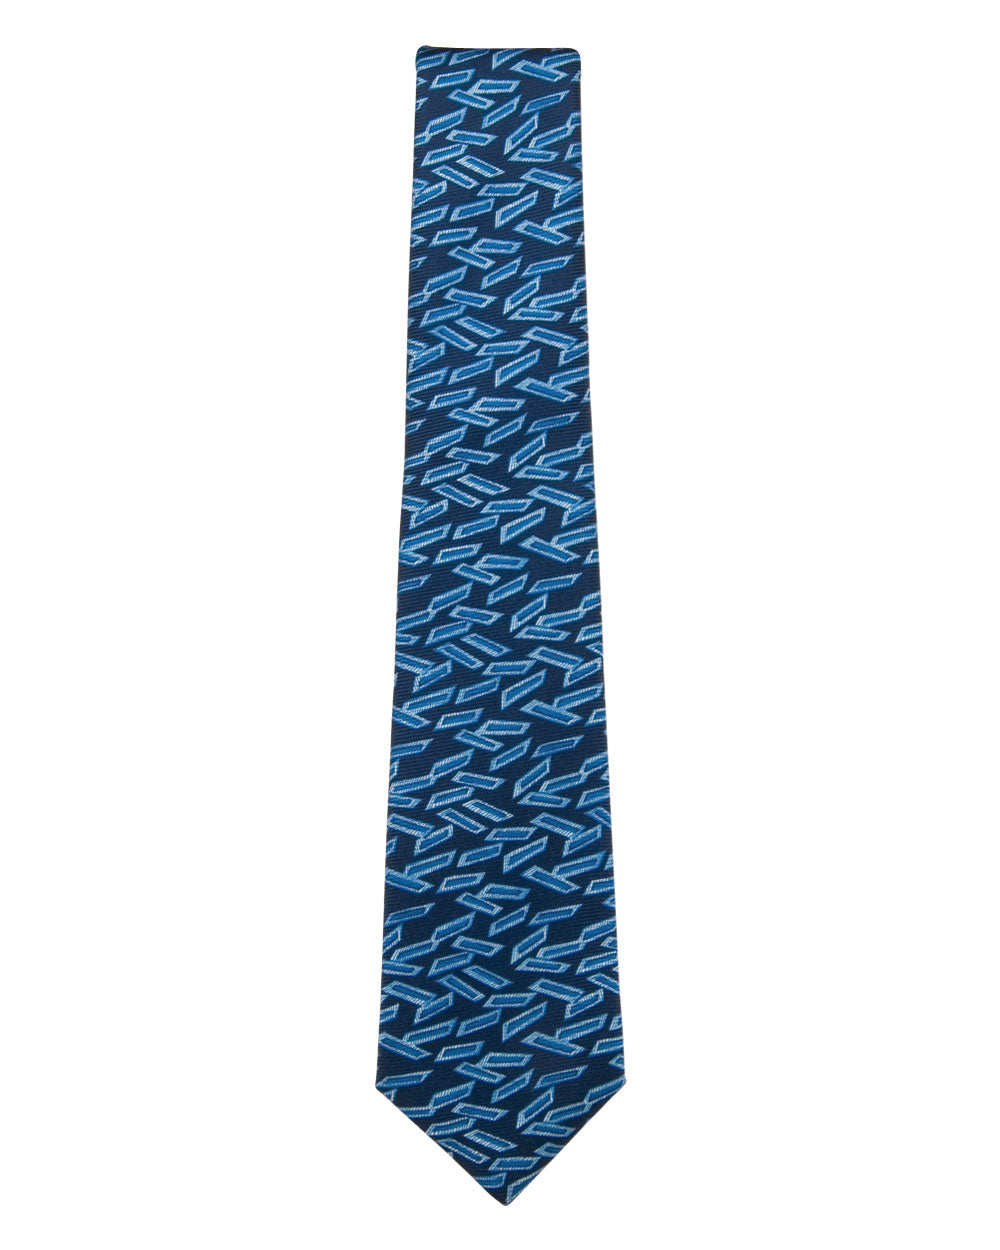 Bright Blue and Navy Slices Tie